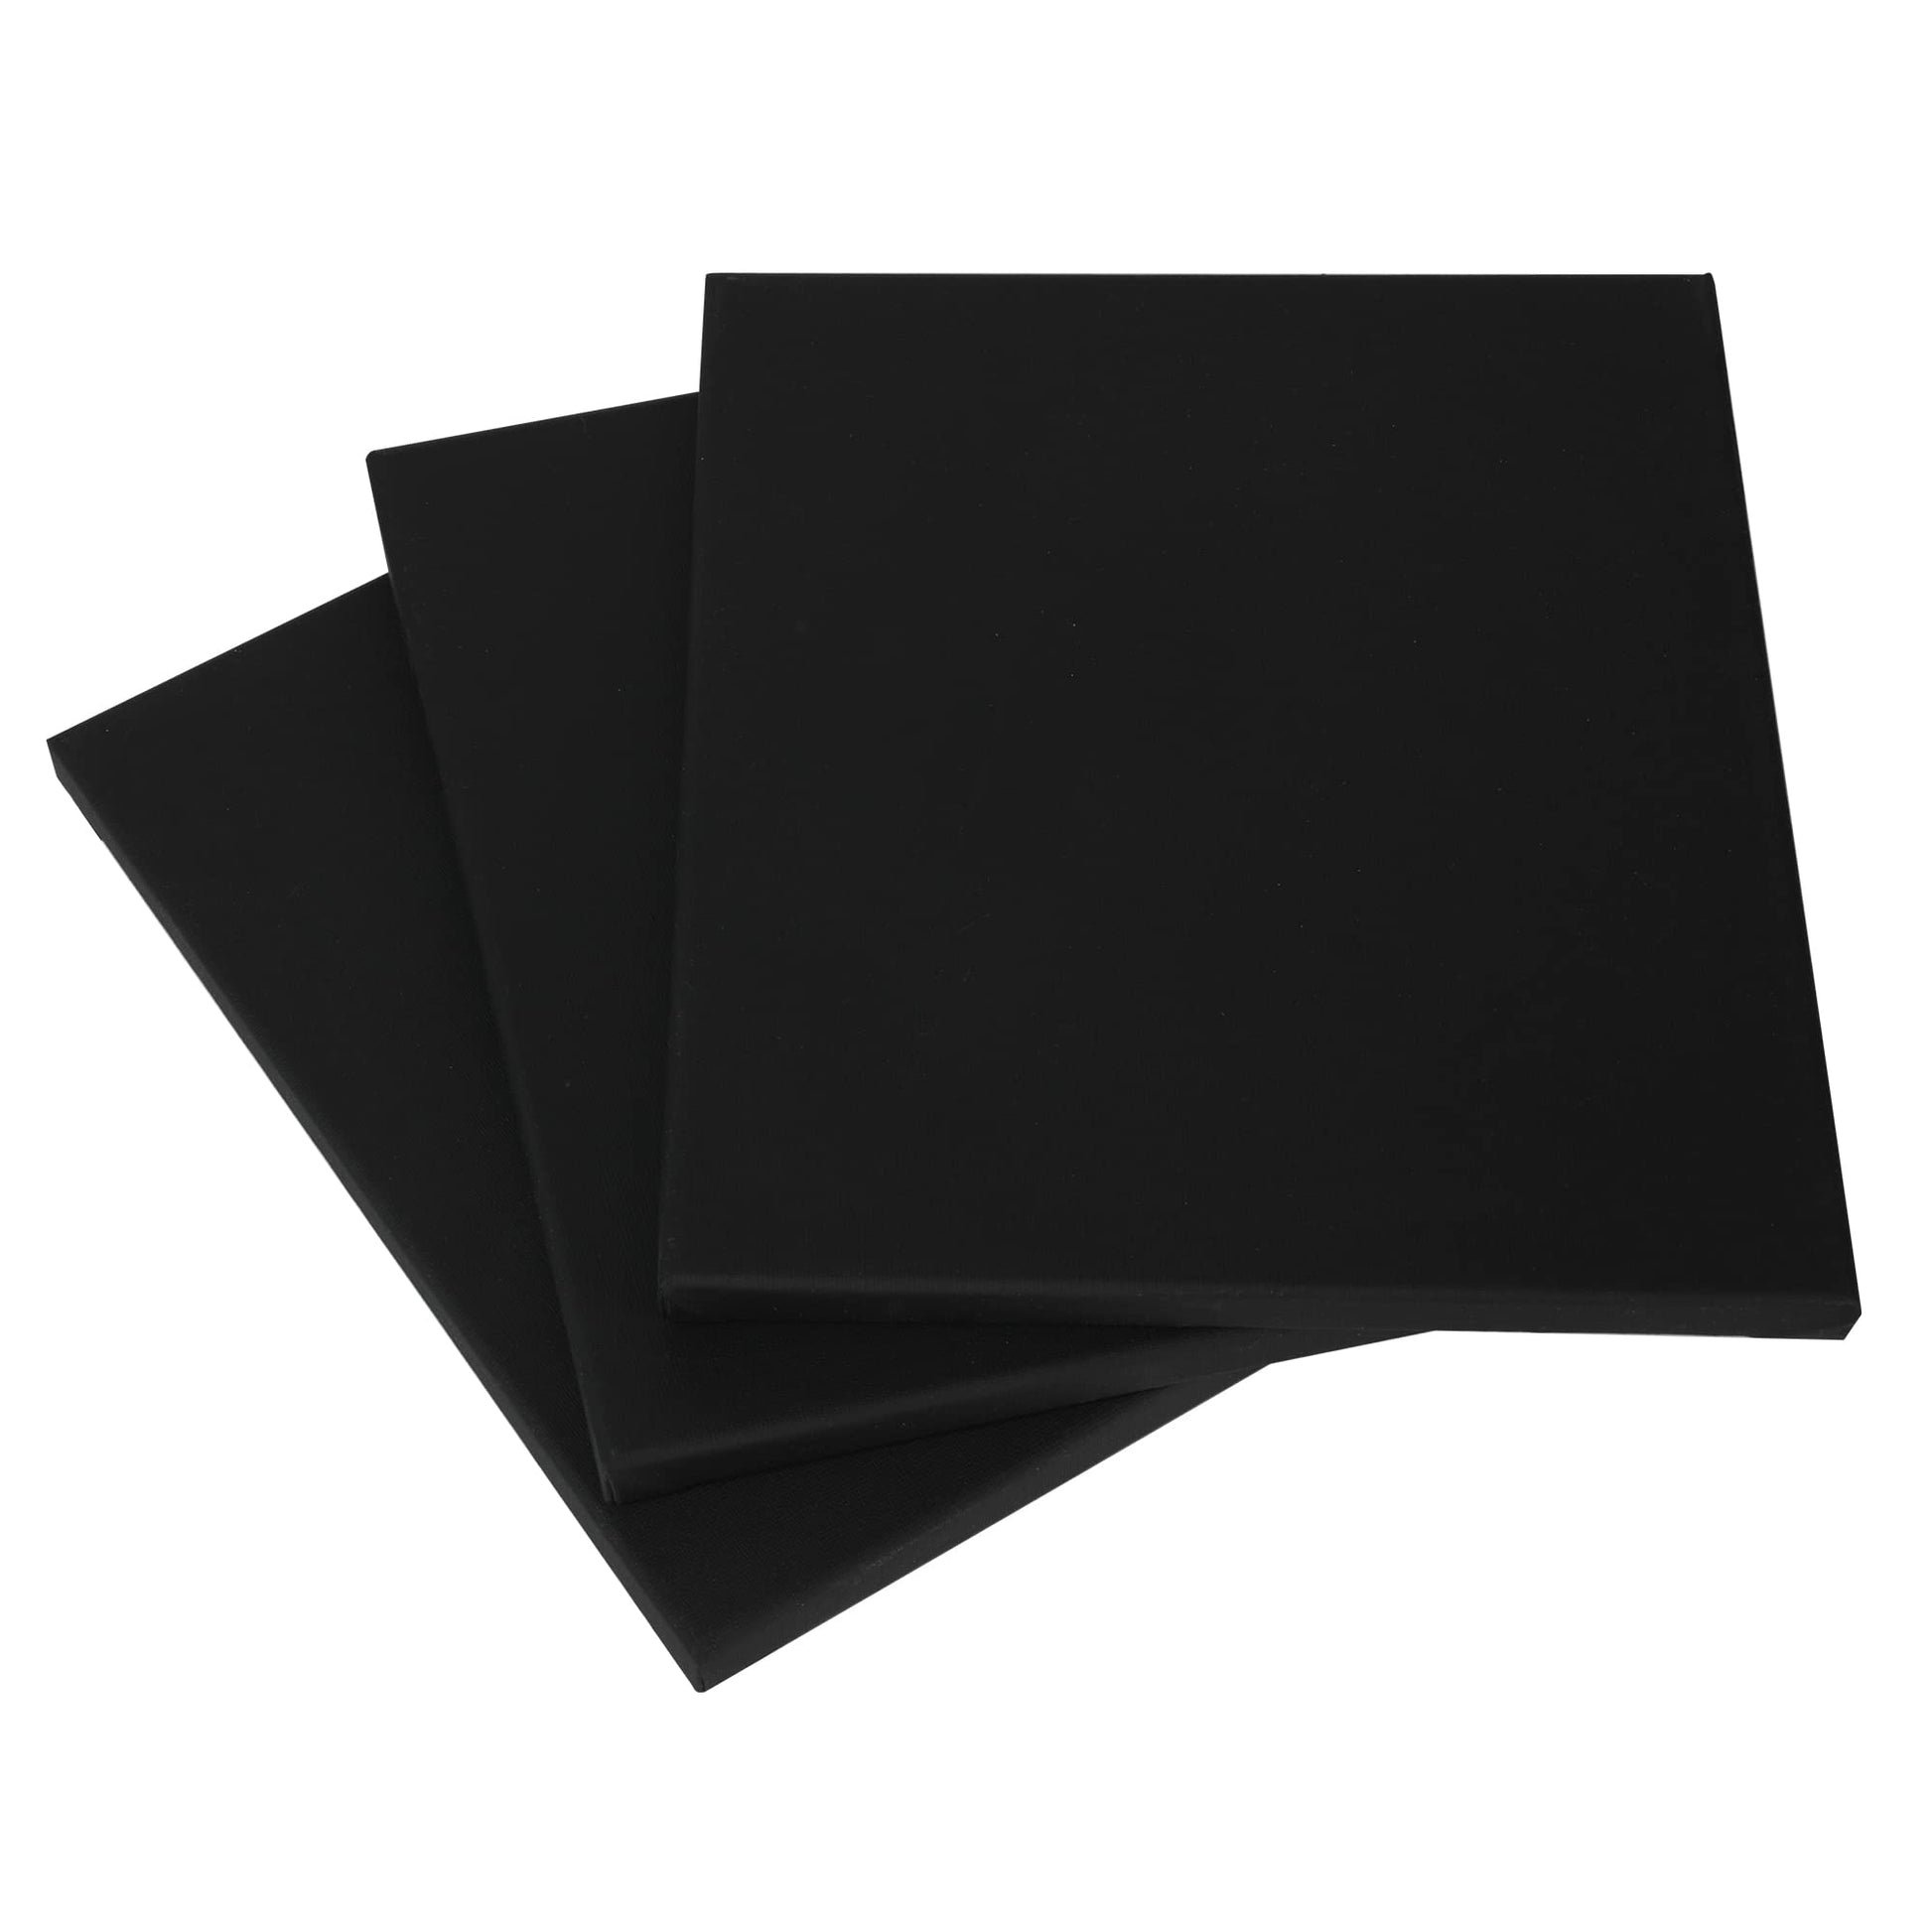  Zingarts Black Canvas,12x16 Inch 6-Pack, 100% Cotton Primed  Acid-Free Stretched Black canvases for Painting, Art Supplies for Acrylic  Pouring, Oil Painting and Watercolor Paints